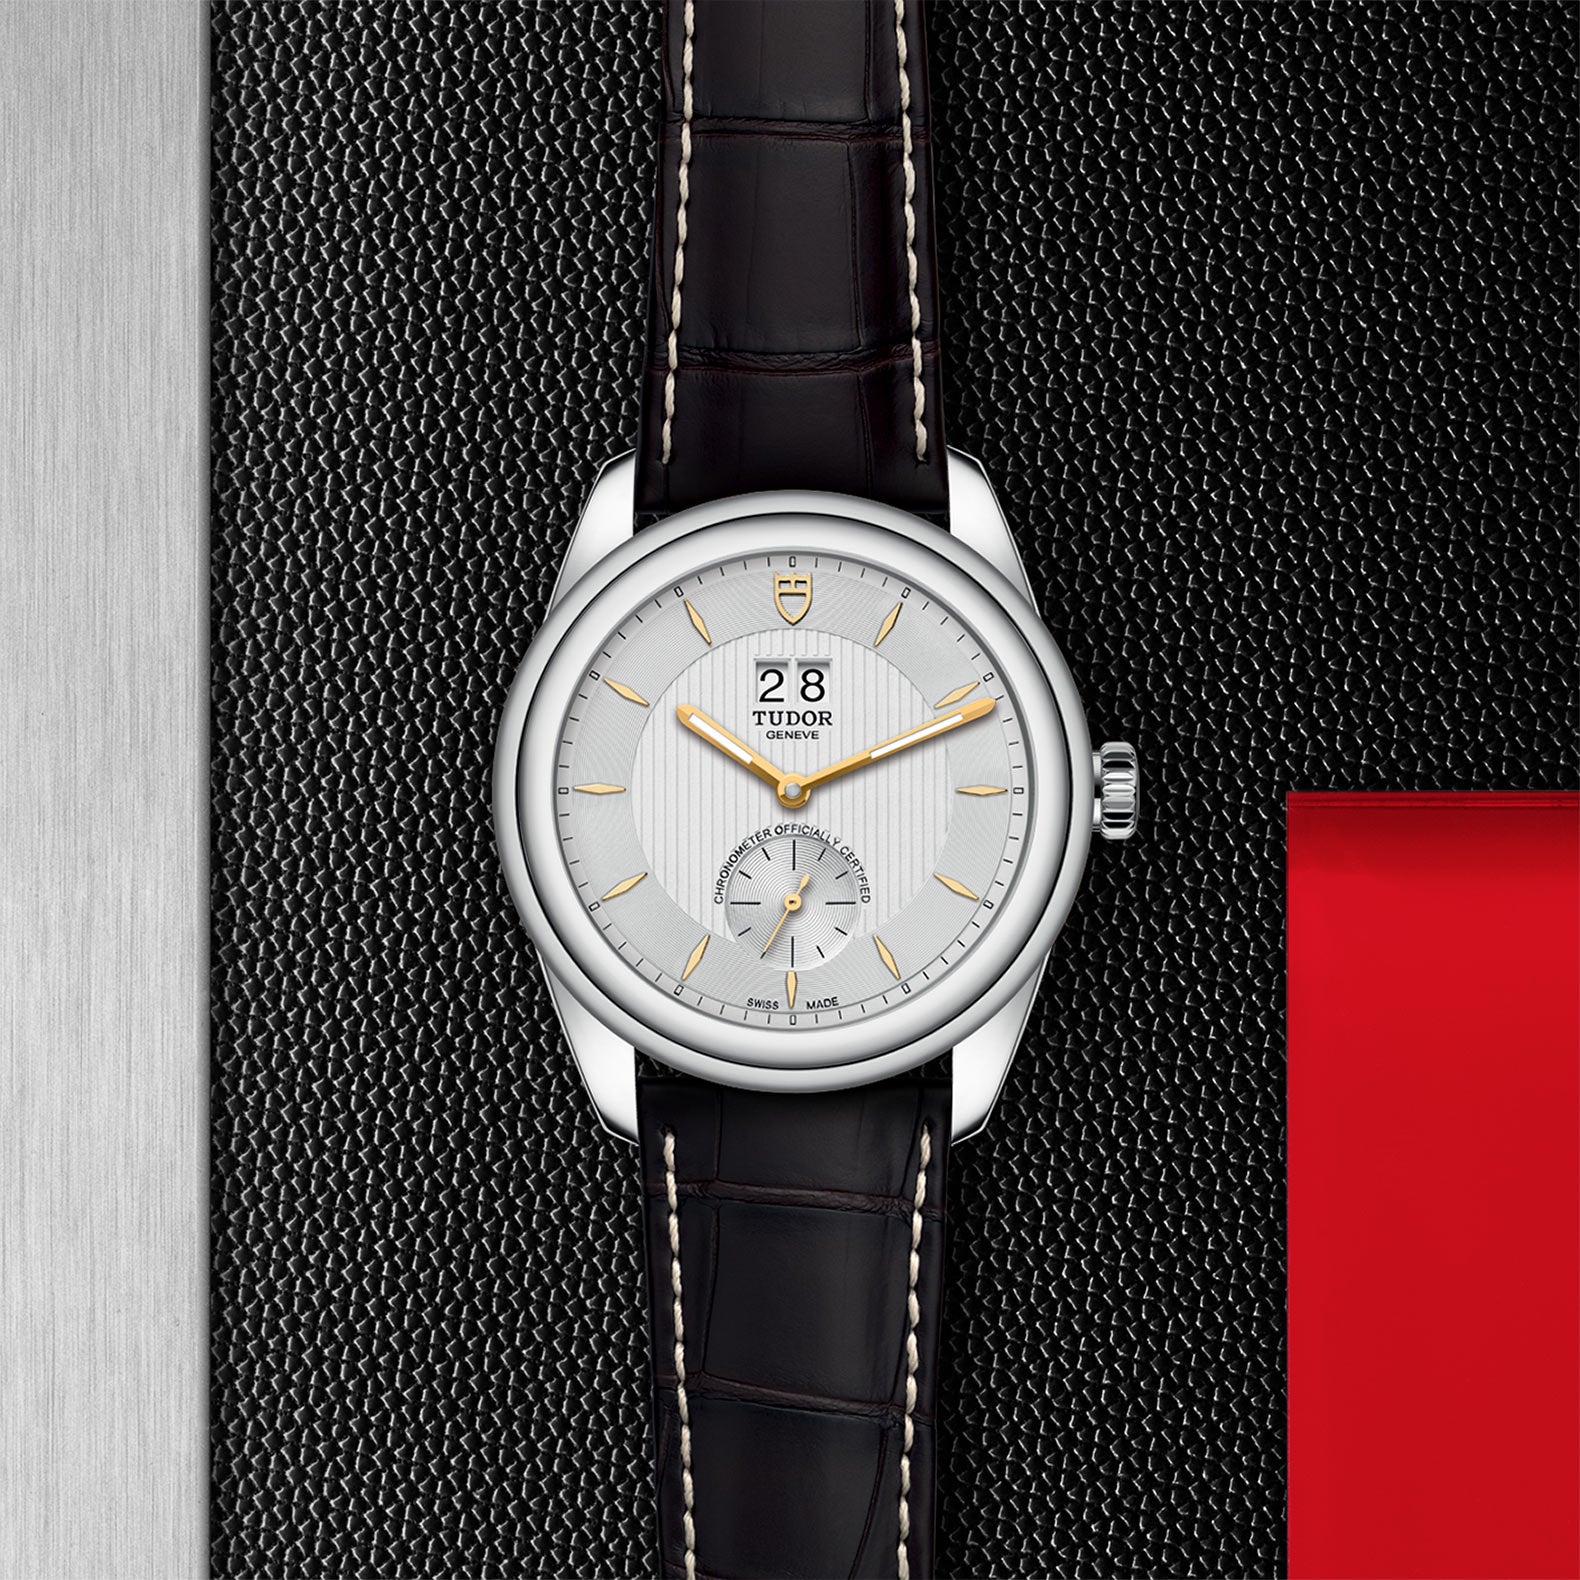 TUDOR Glamour Double Date, model #M57100-0017, at IJL Since 1937